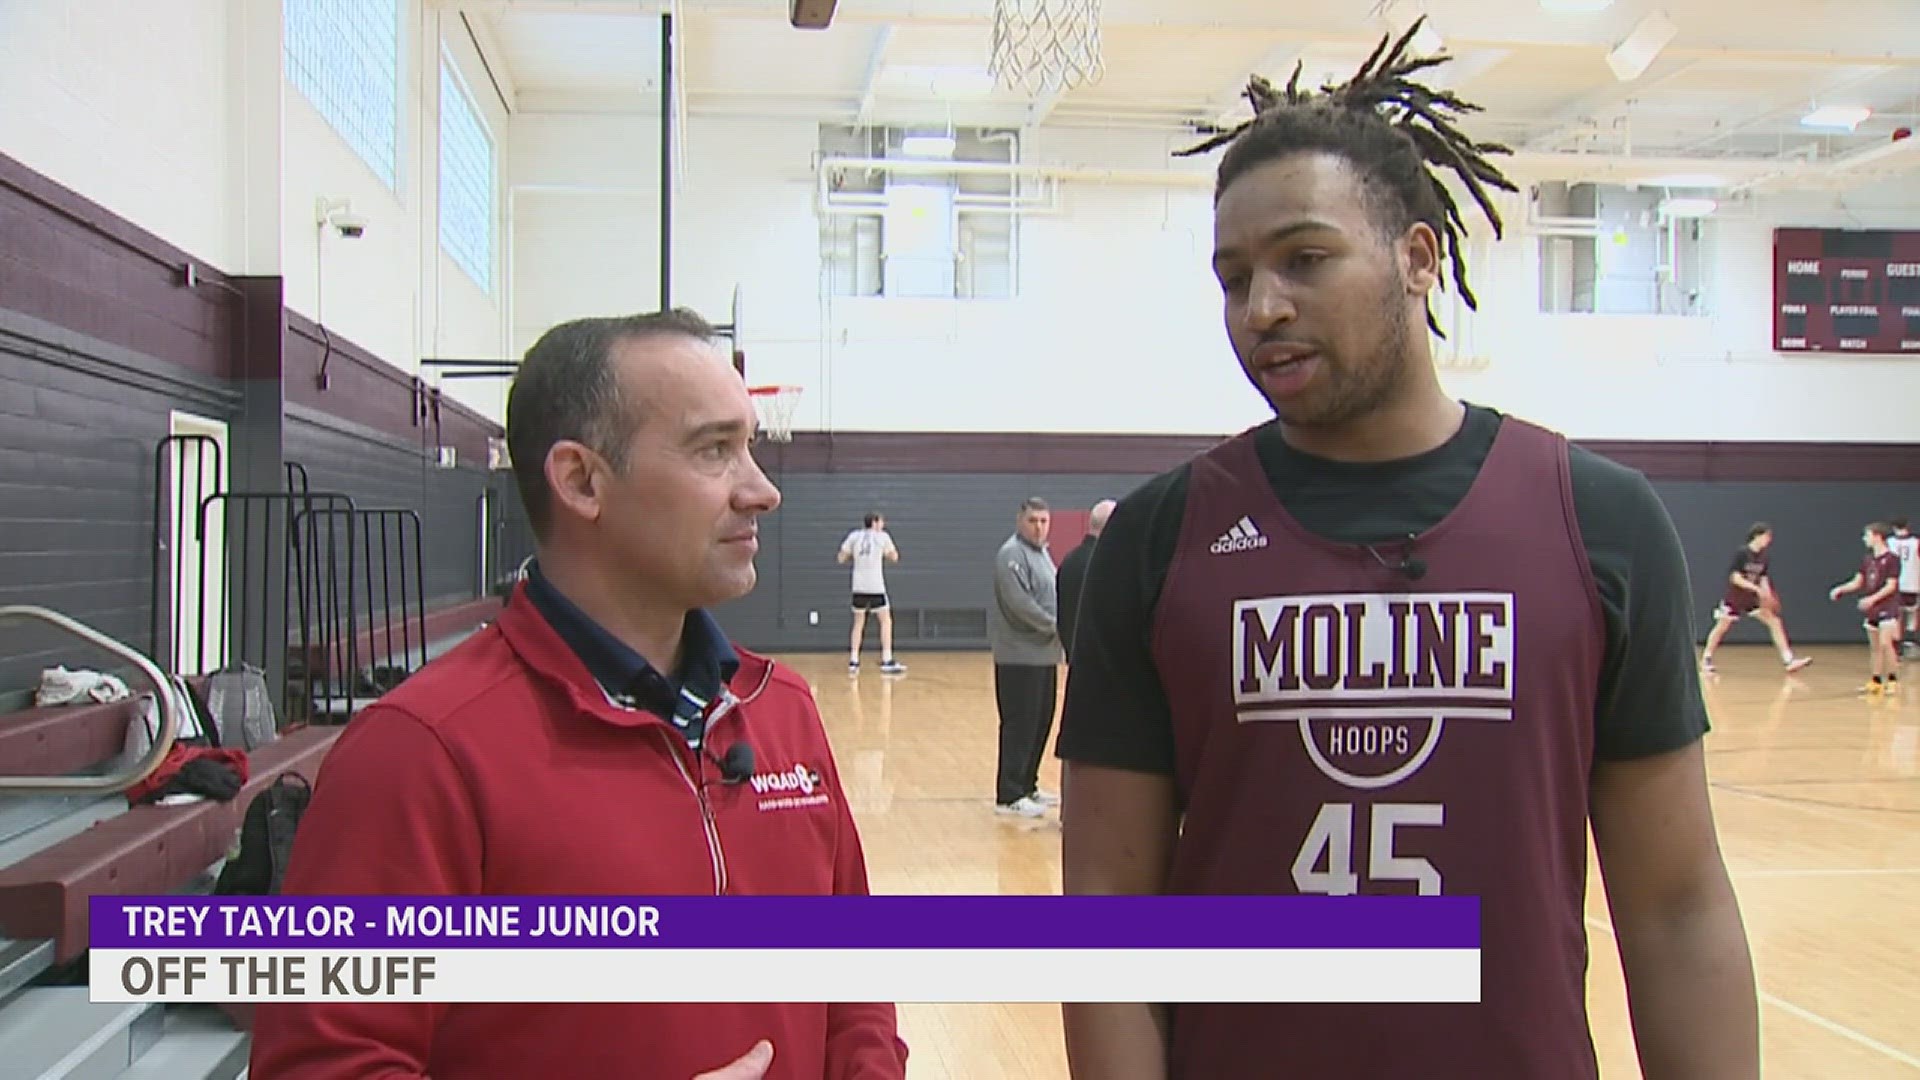 Trey Taylor is a junior at Moline and won this week's Score Standout for scoring 24 points in a big win over Sterling.